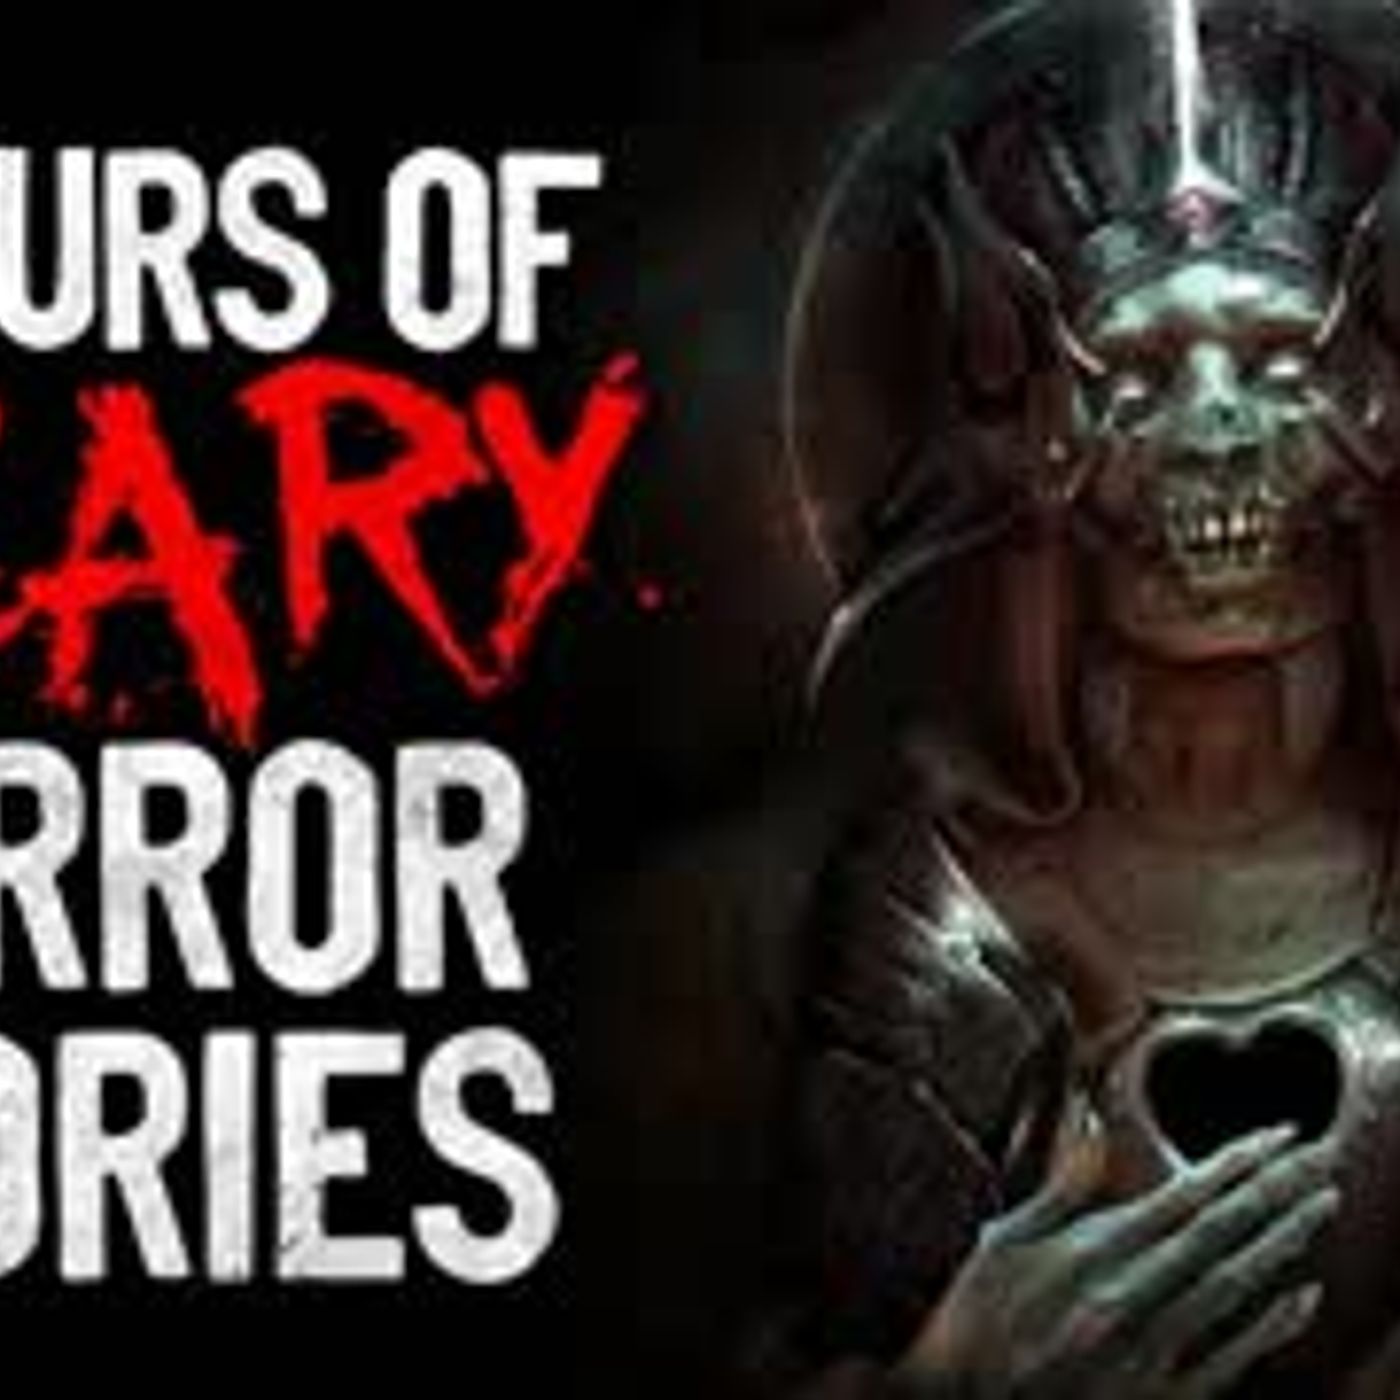 4 Hours of SCARY Reddit r/Nosleep Horror Stories to sleep to since this is a pretty long one